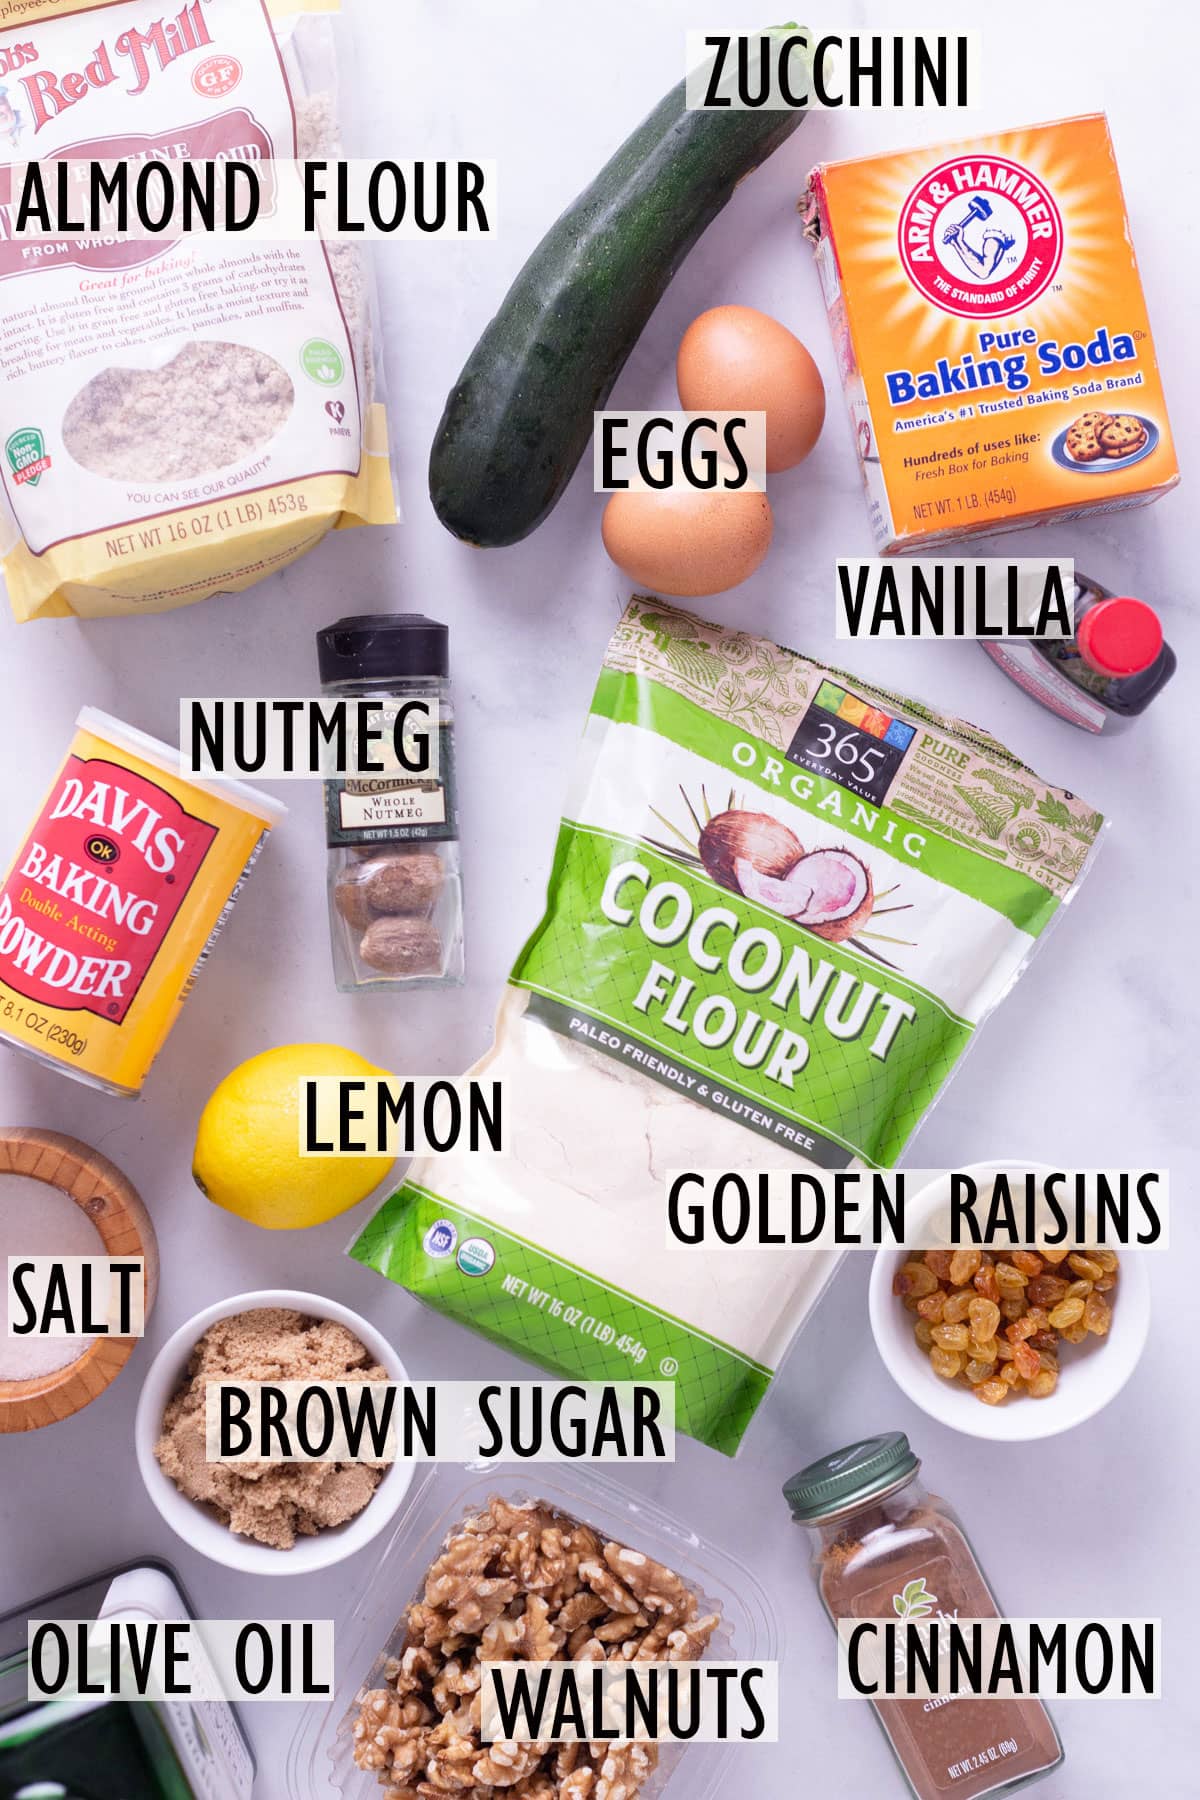 Individual ingredients needed for zucchini bread, including almond flour, coconut flour, zucchini, eggs, brown sugar, walnuts and raisins.